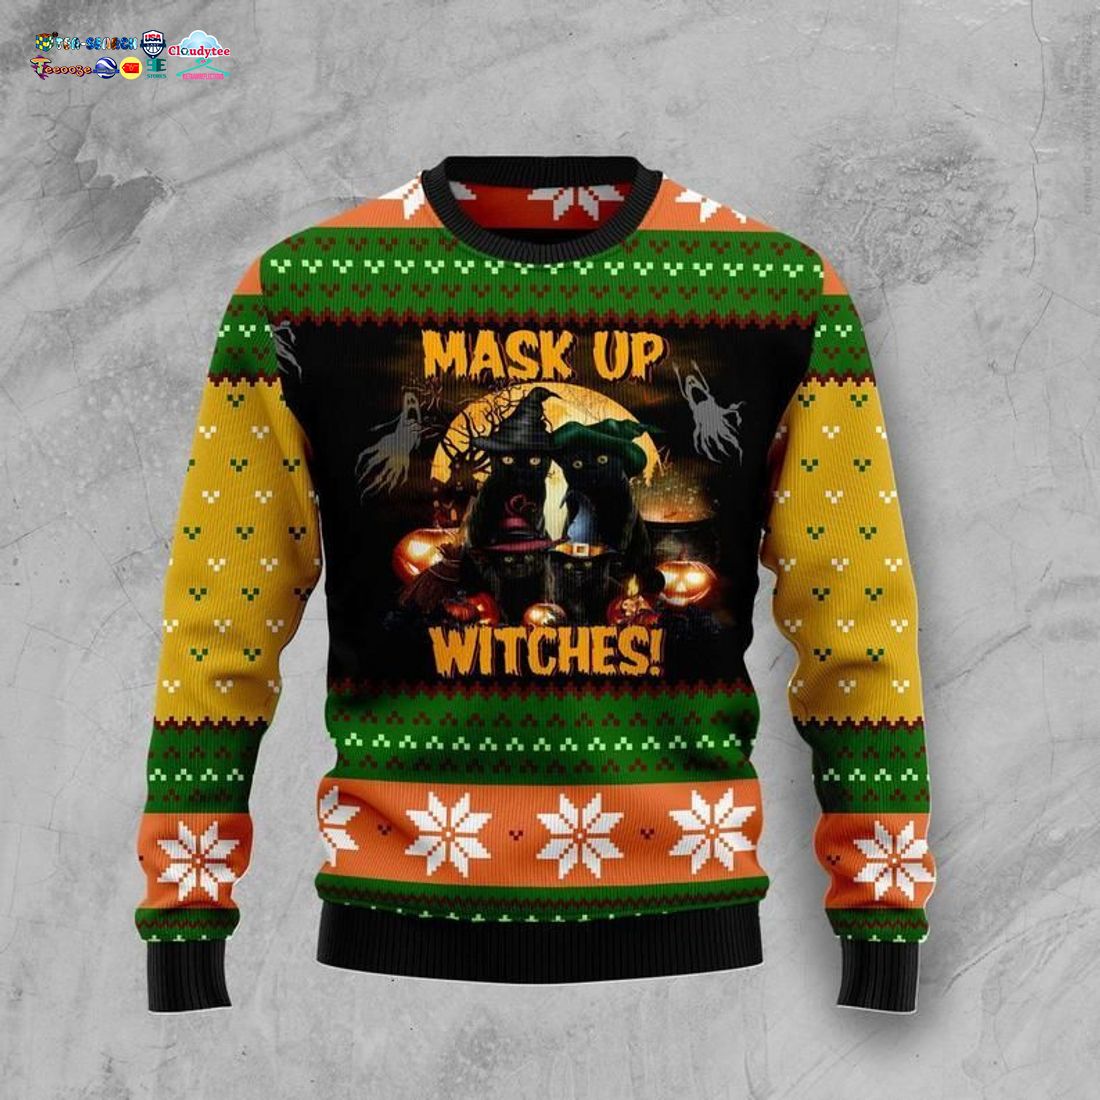 Black Cat Mask Up Witches Ugly Christmas Sweater